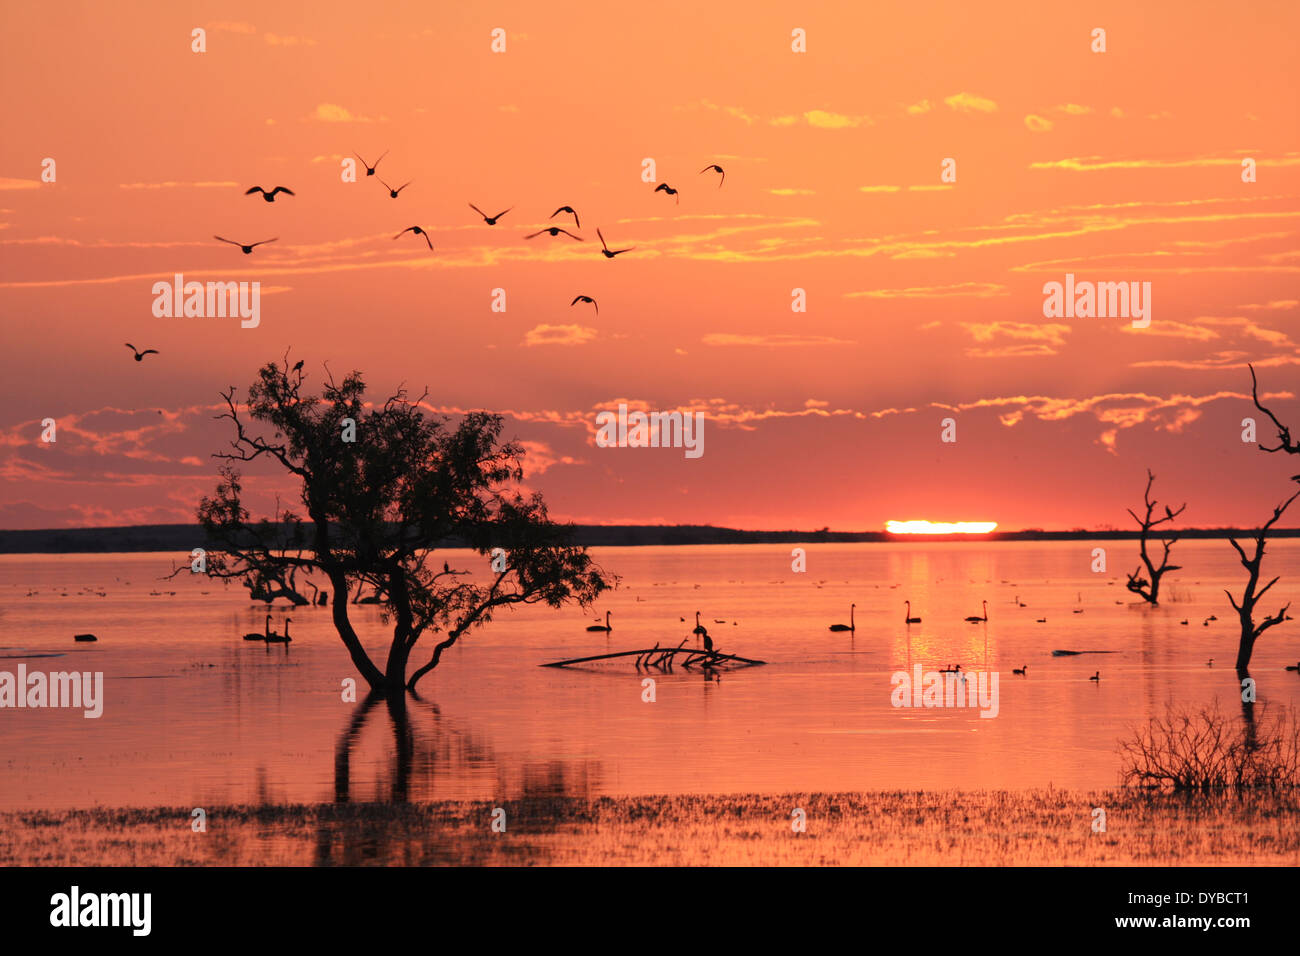 Sunset, Cooper River in flood, bird silhouettes, outback Australia Stock Photo